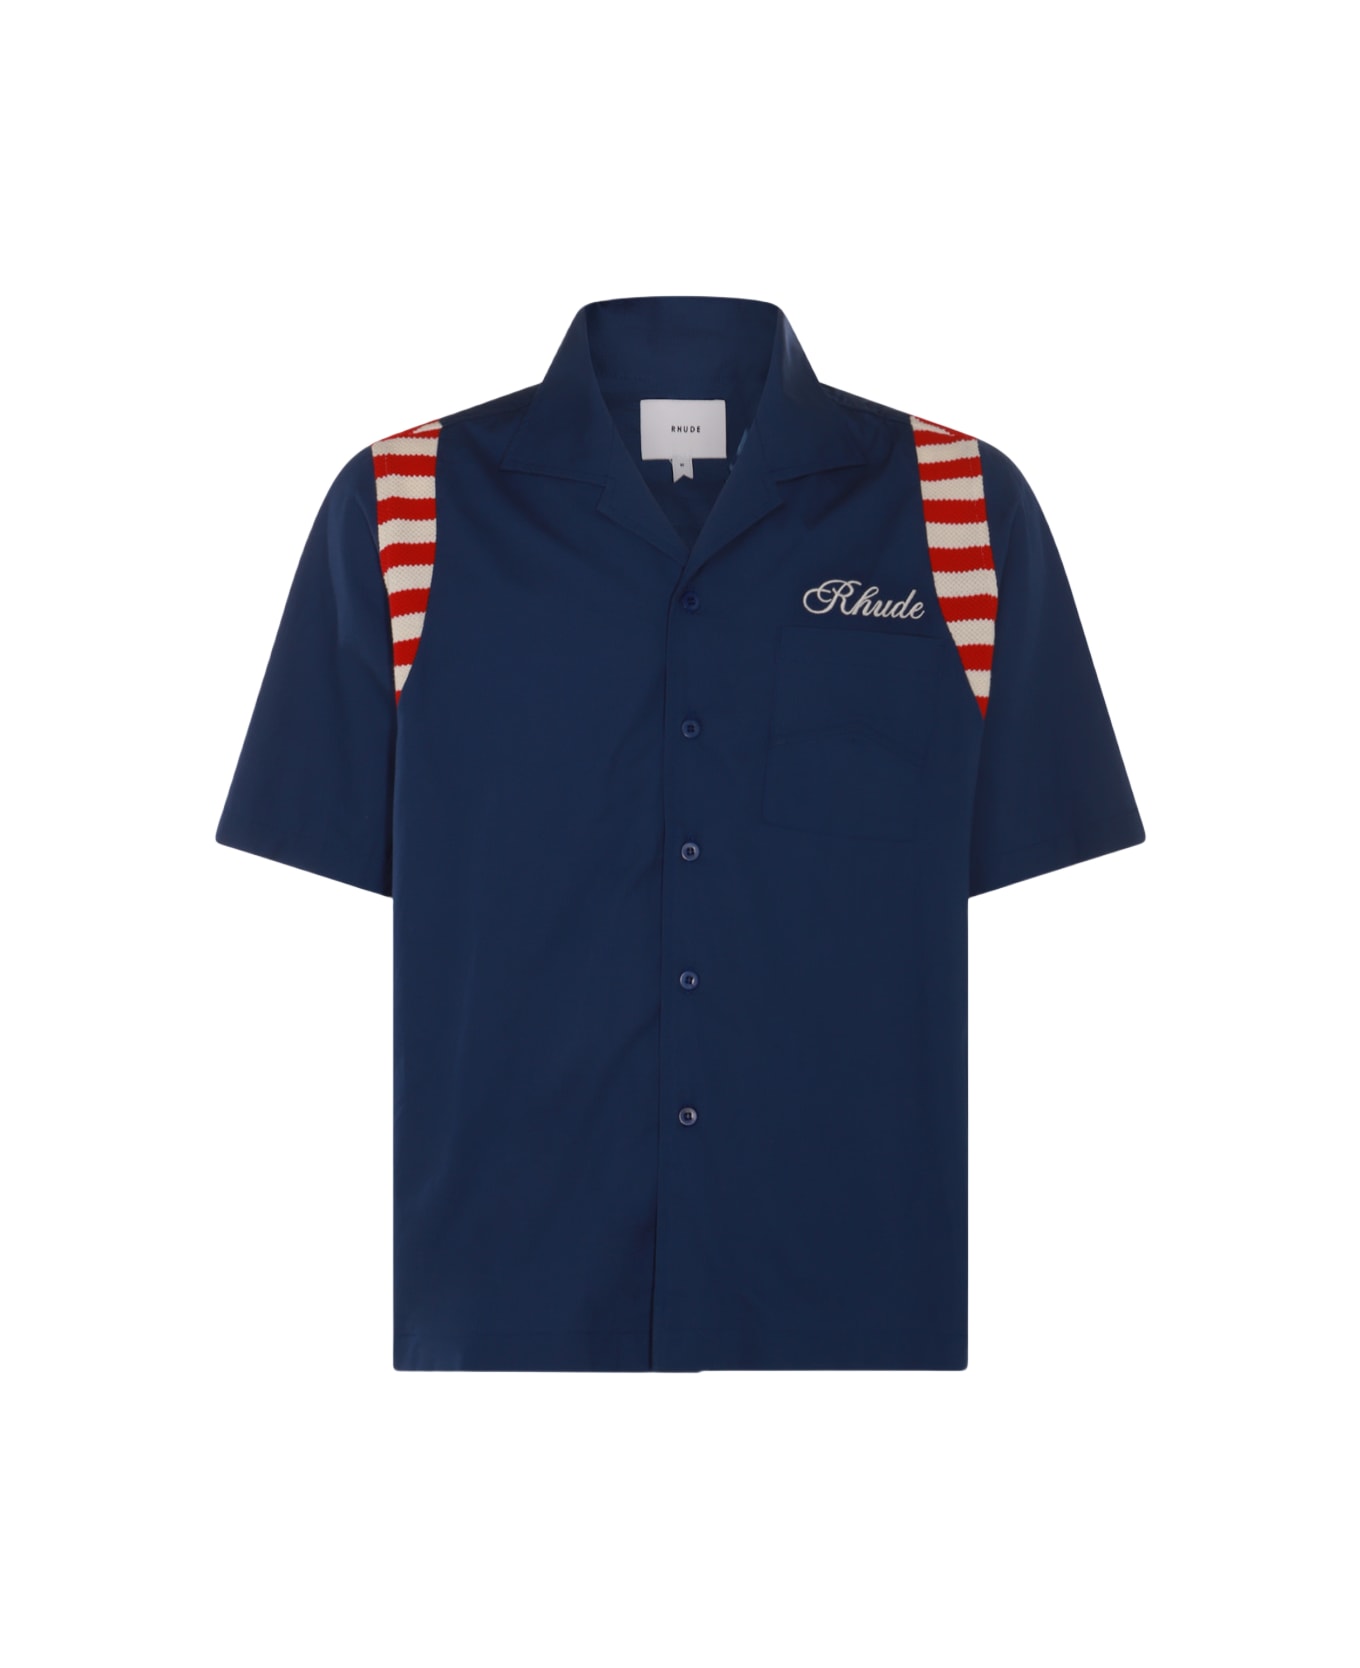 Rhude Navy Blue, Cream And Red Cotton Shirt - Blue シャツ